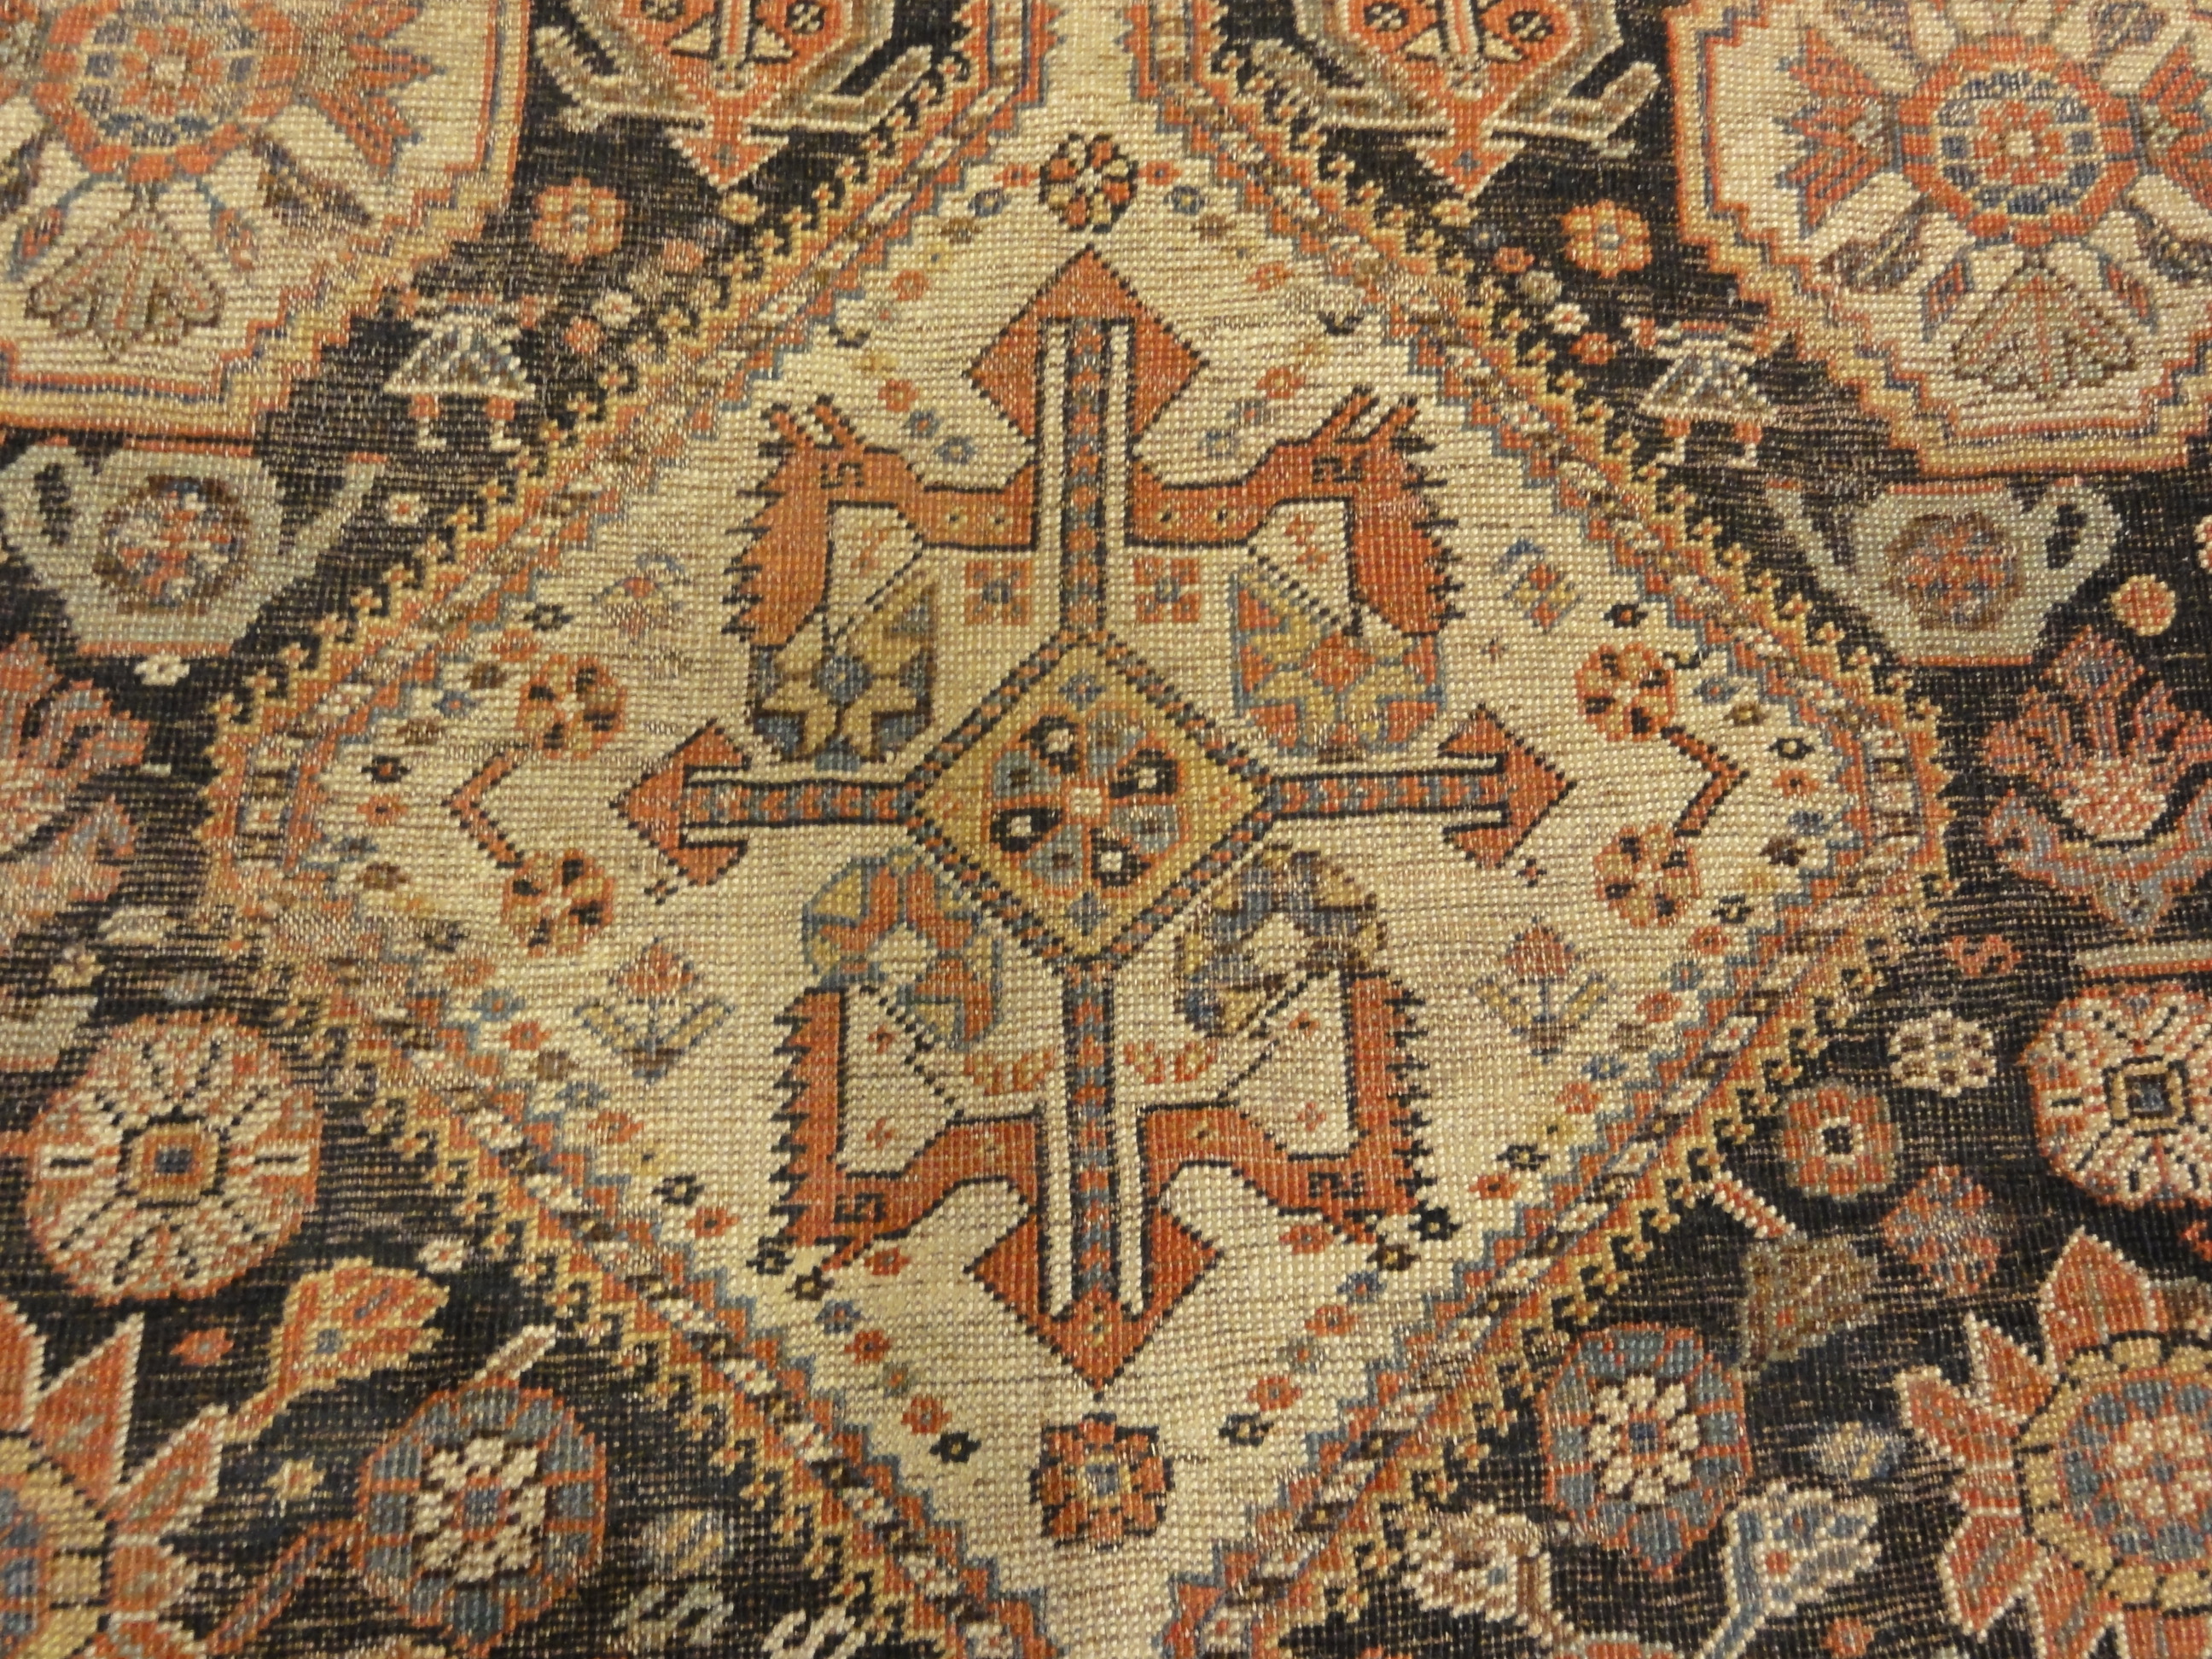 Antique Persian Qashqai featuring Tribal Flowers. A piece of genuine handwoven carpet art sold by Santa Barbara Design Center Rugs and More.